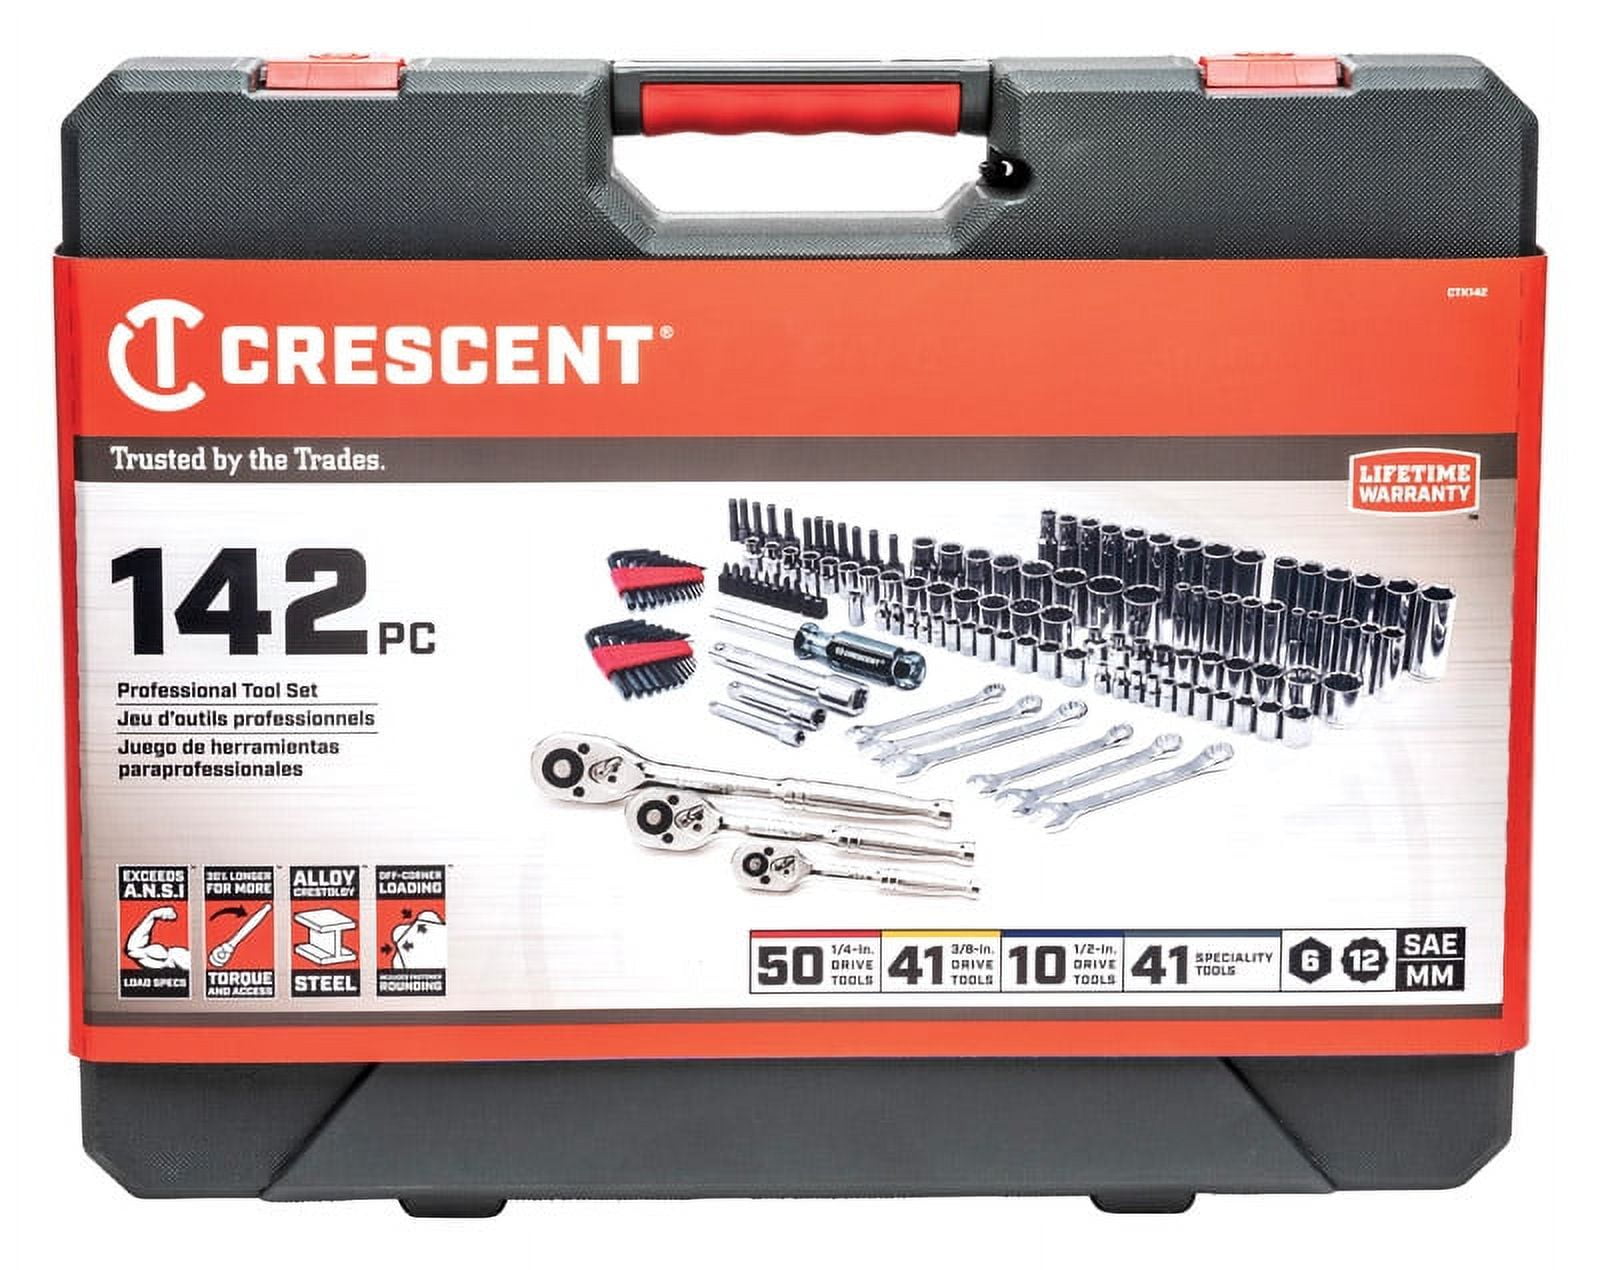 Crescent 1/4, 3/8 and 1/2 in. drive Metric and SAE 6 and 12 Point  Mechanic's Tool Set 142 pc.